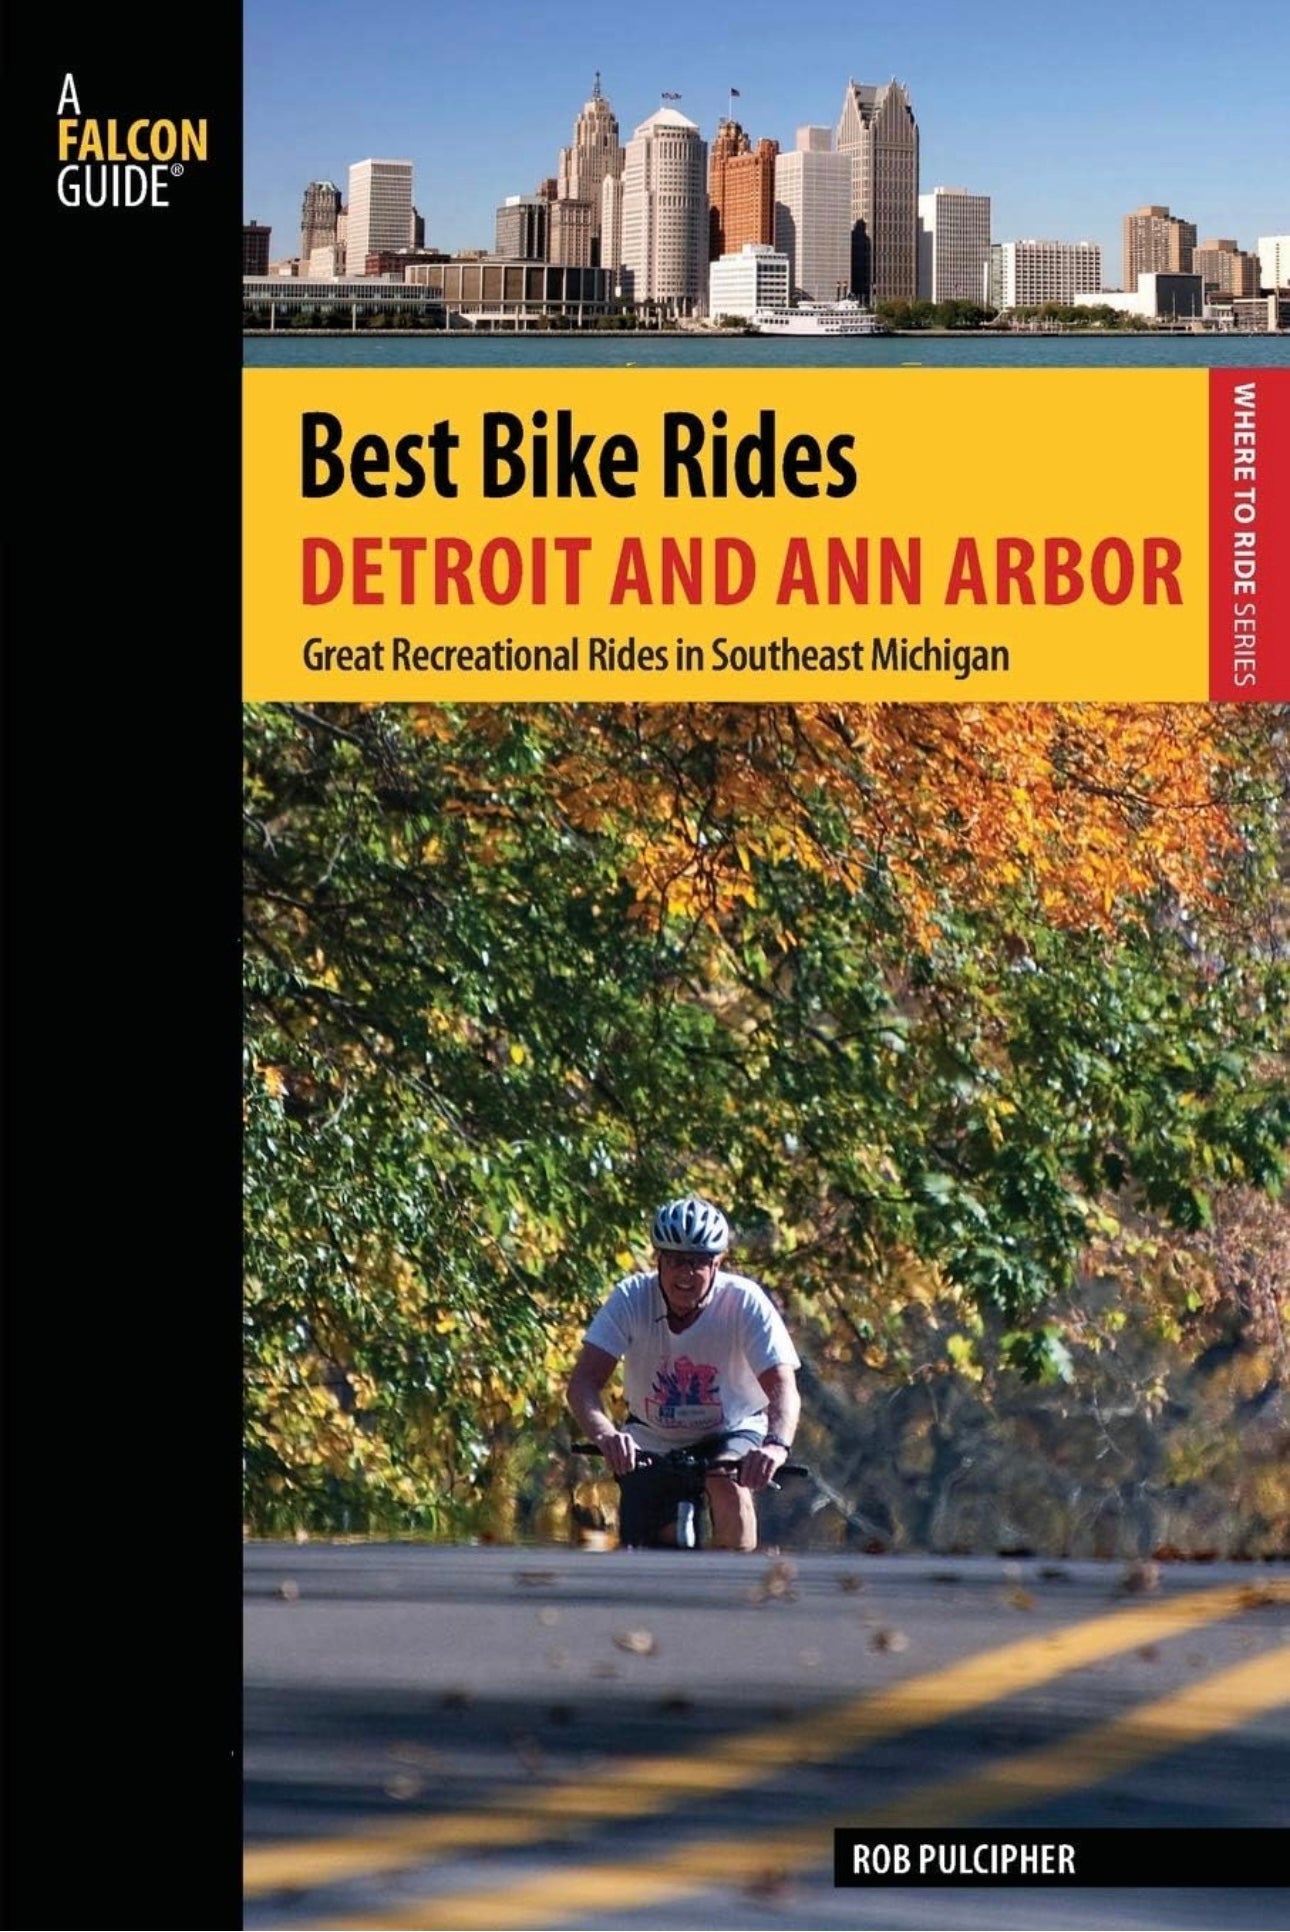 Best Bike Rides Detroit and Ann Arbor: Great Recreational Rides and Southeast Michigan